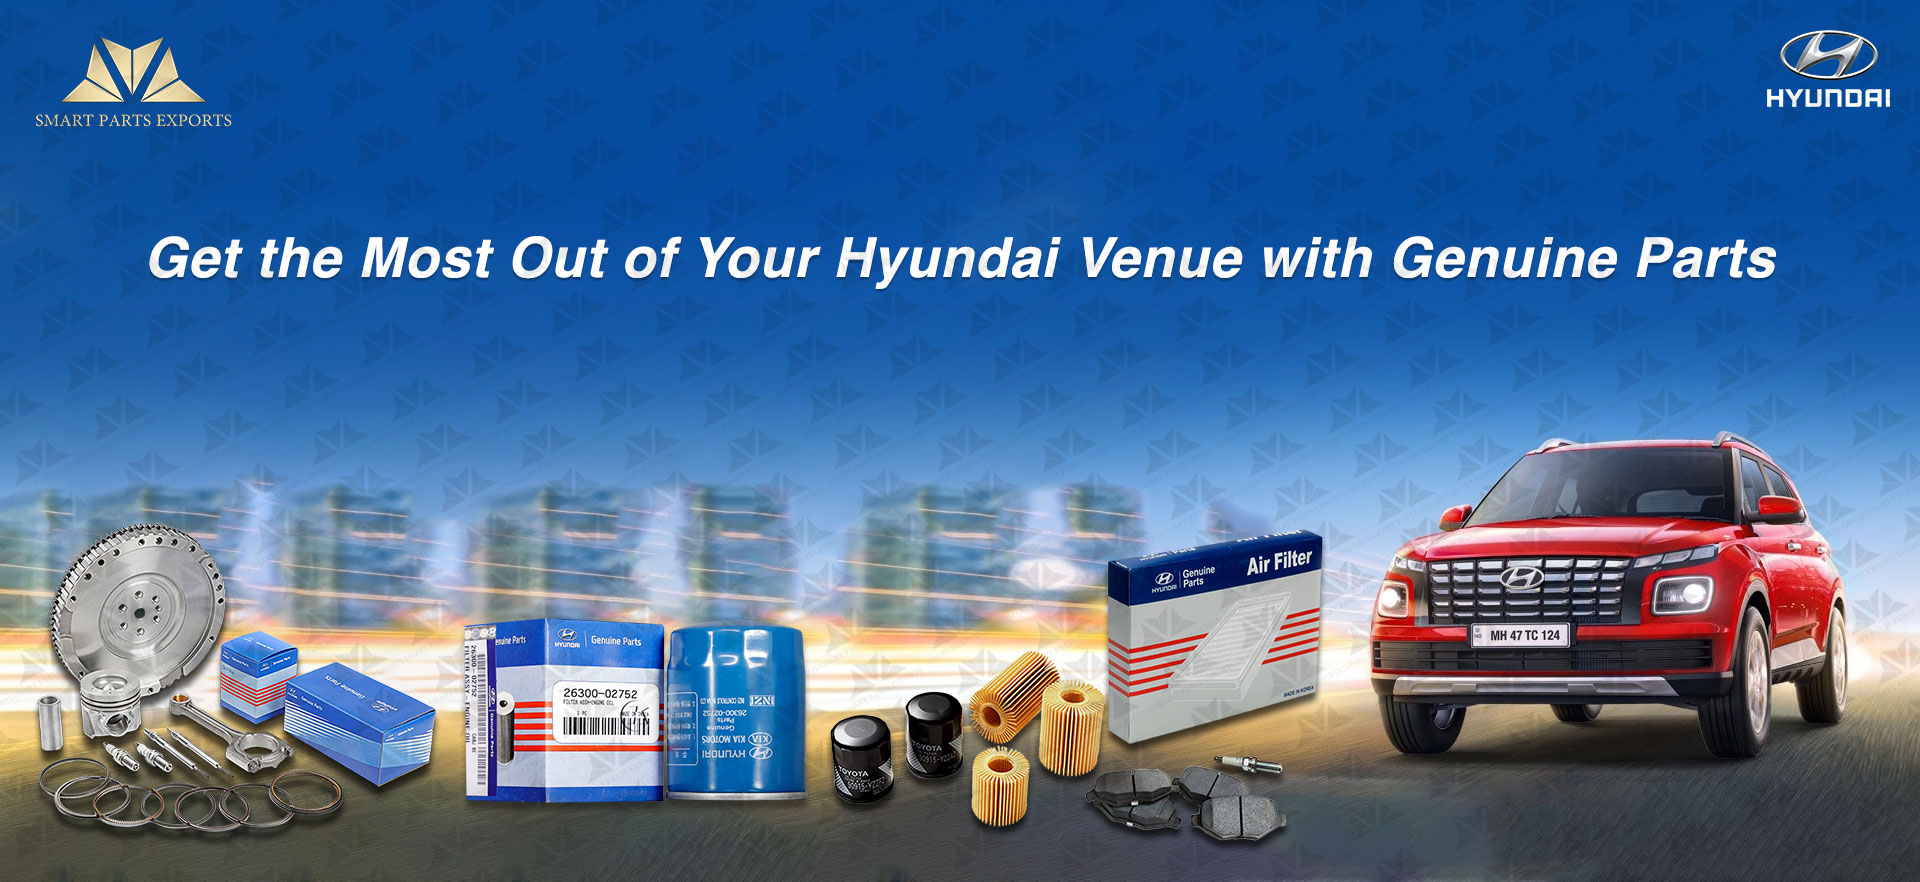 Get the Most Out of Your Hyundai Venue with Genuine Parts